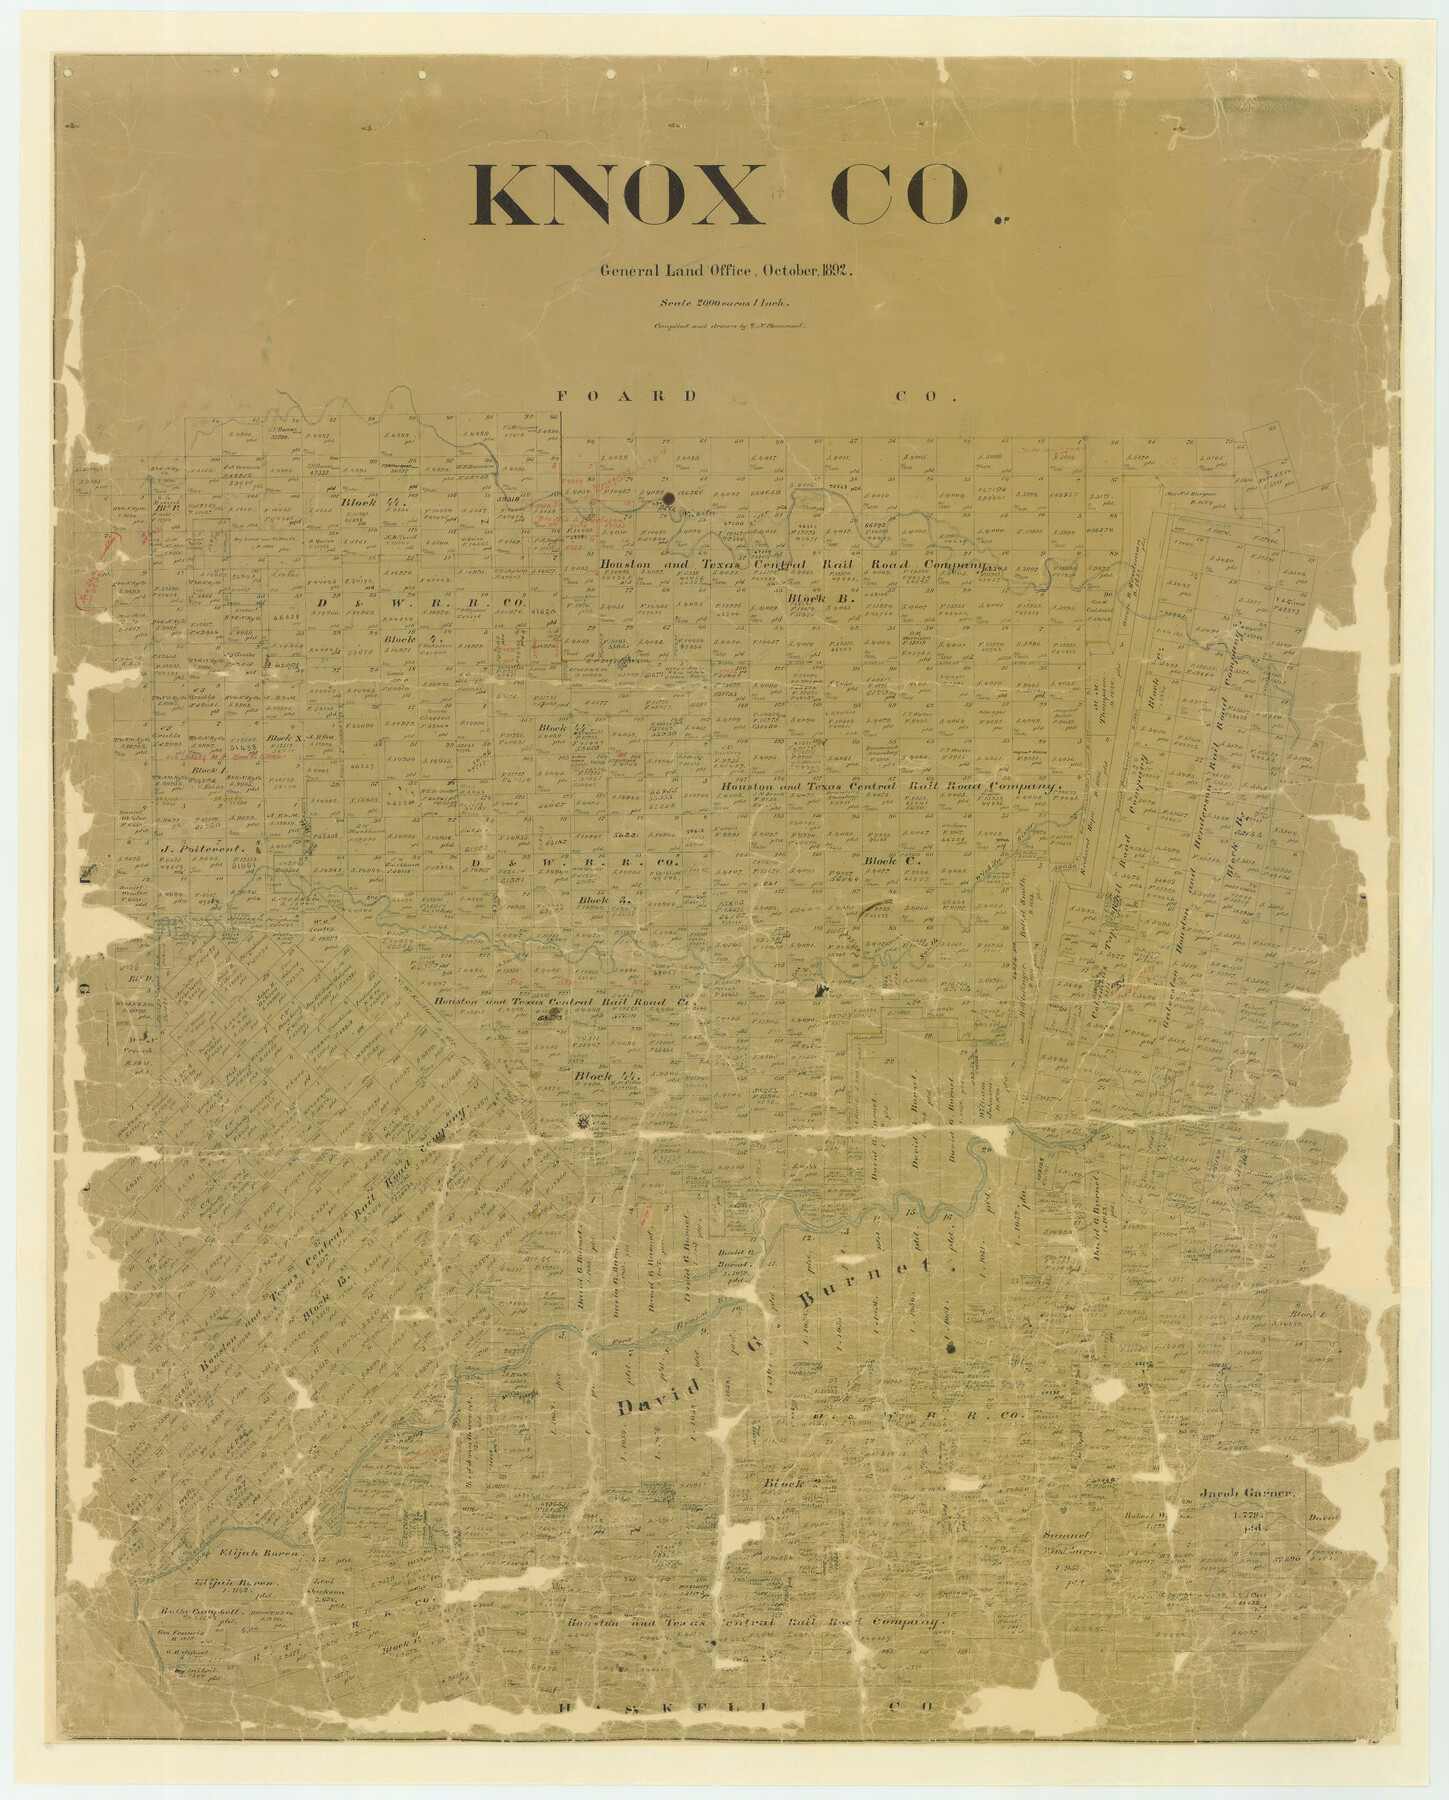 16870, Knox Co., General Map Collection